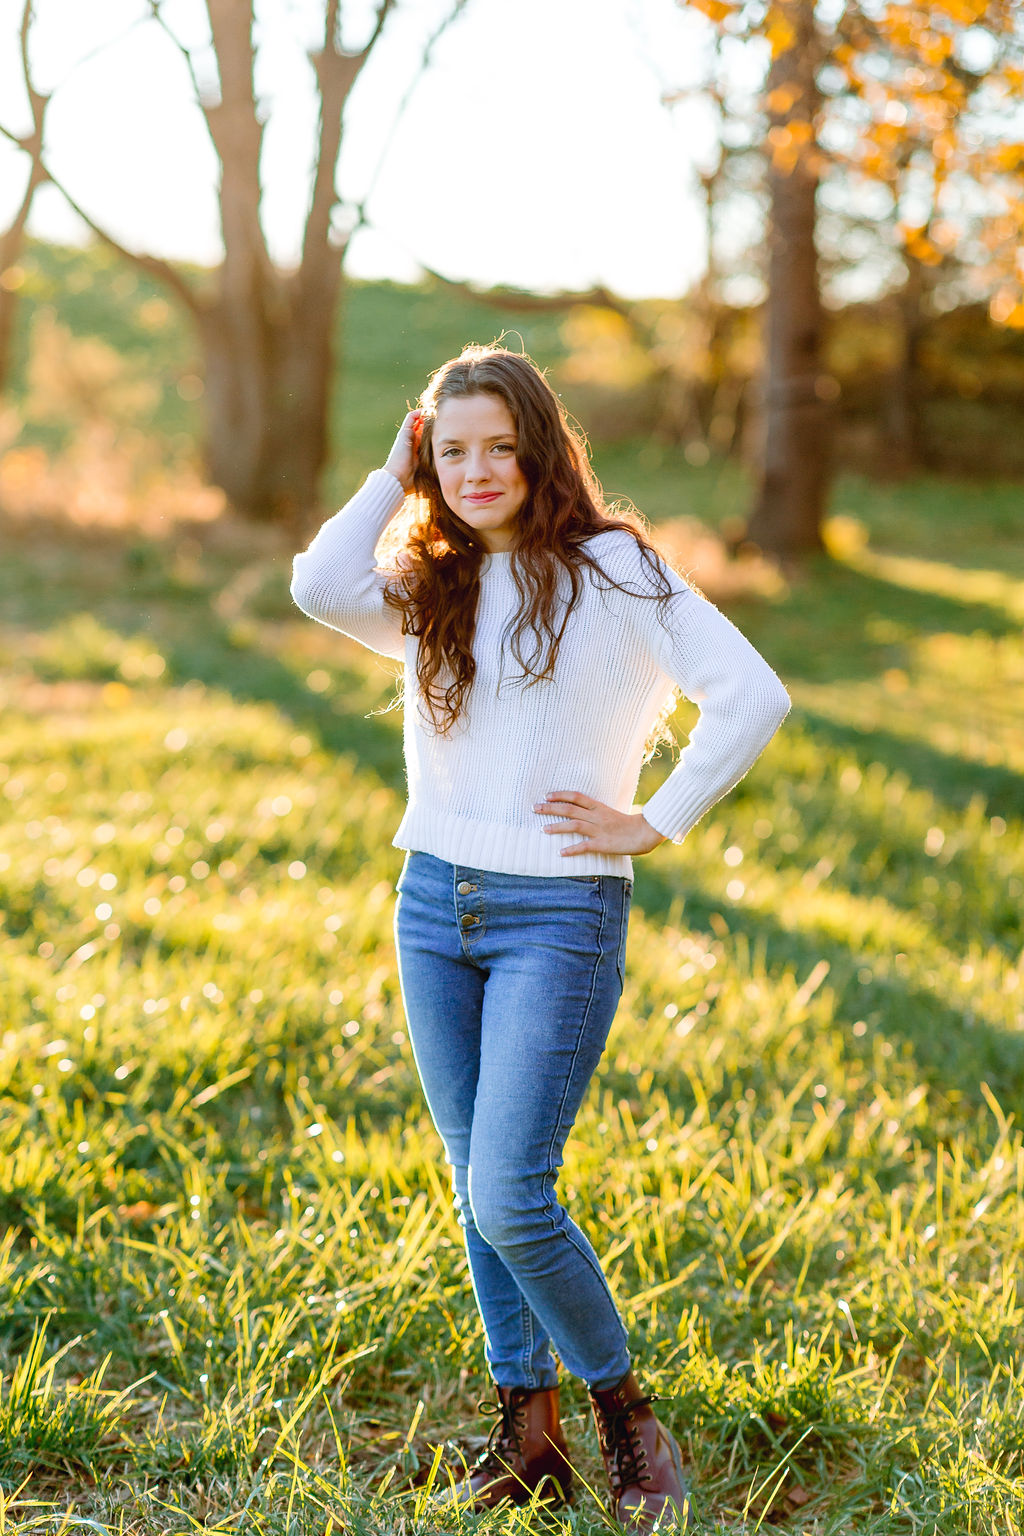 A teenage girl in jeans and a white sweater runs a hand through her hair in a field at sunset